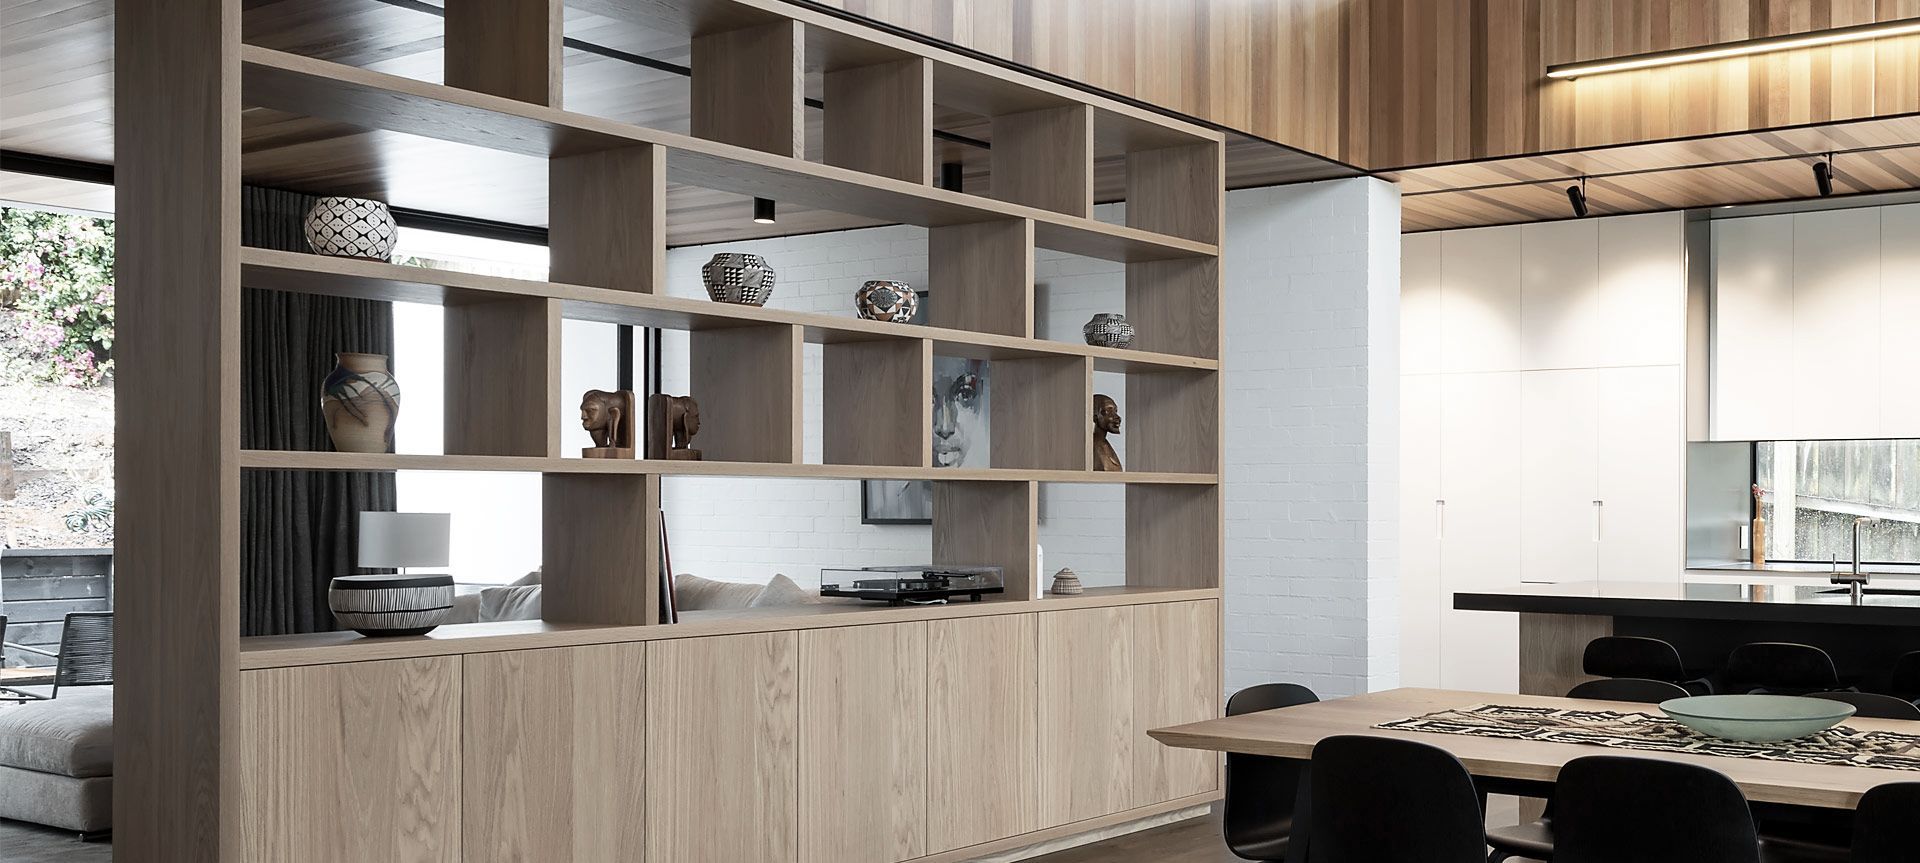 Room divider designed by Herbst Architects, manufactured and installed by Neo Design